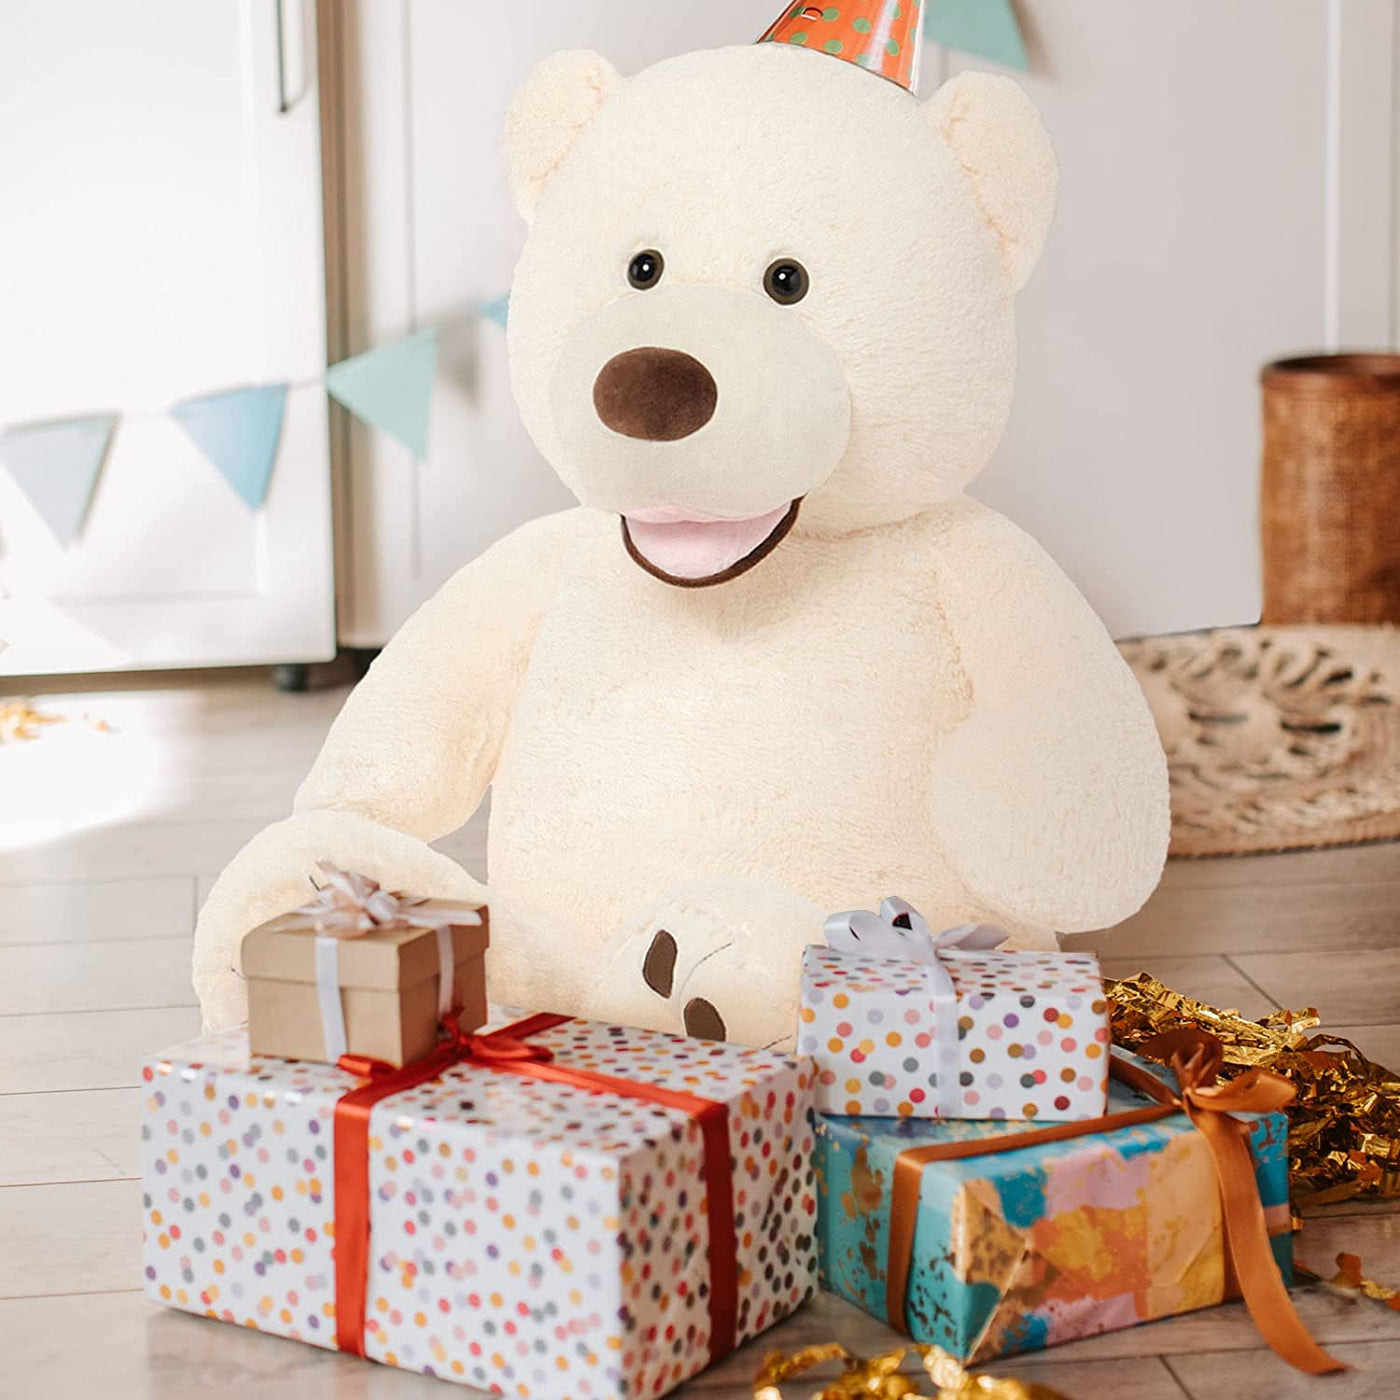 Giant Teddy Bear Stuffed Animal Toy, Multicolor, 51 Inches